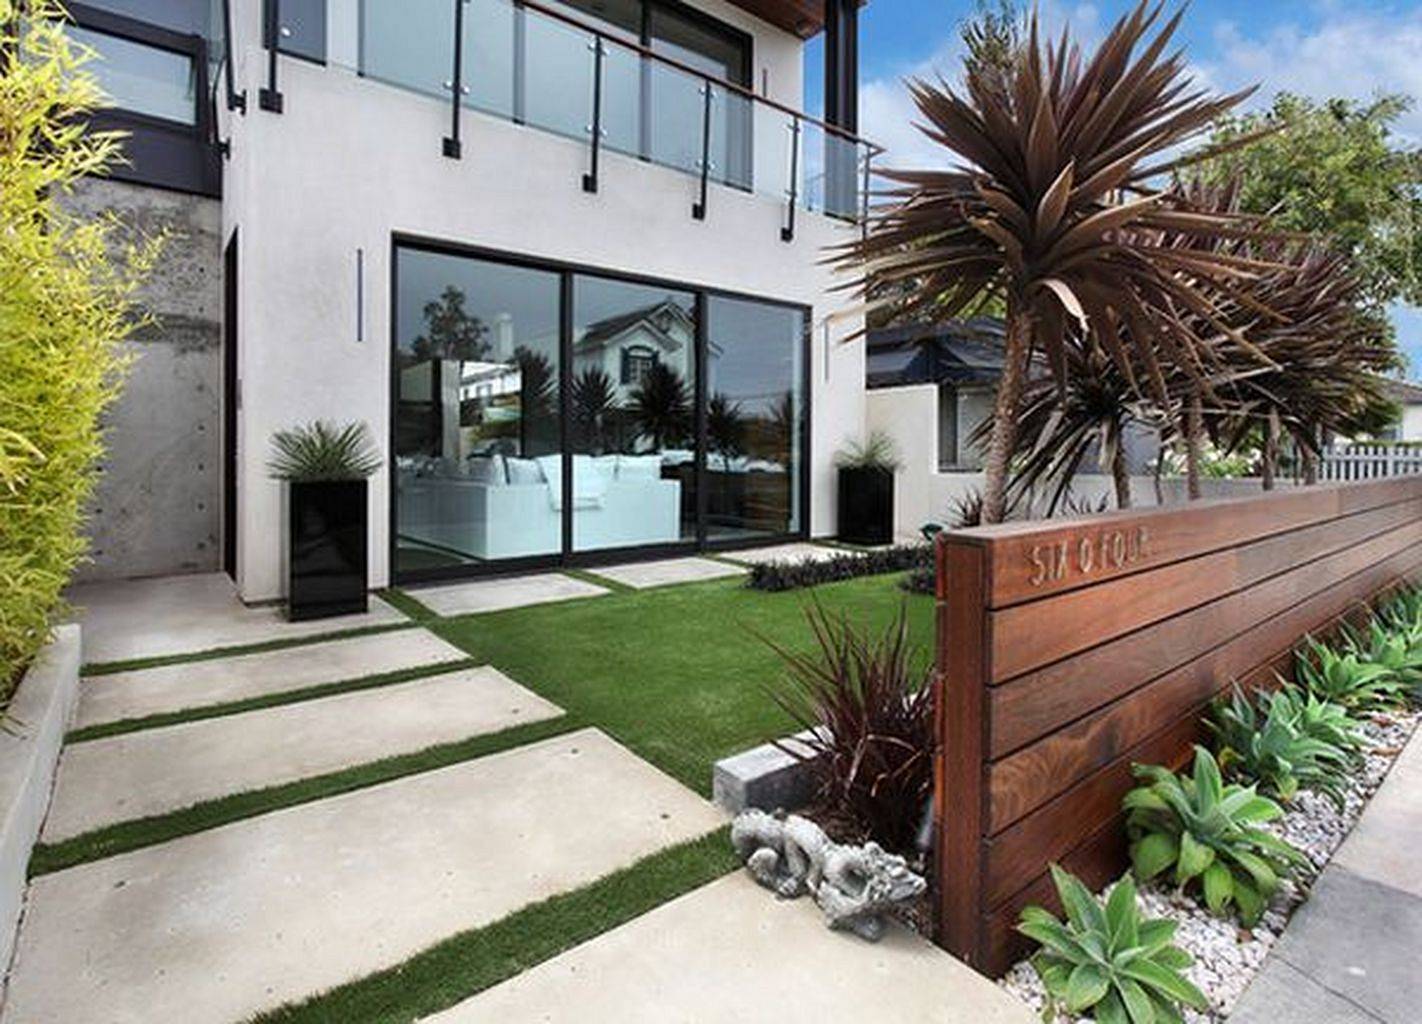 Lovely Modern Front Yard Landscaping Ideas Page